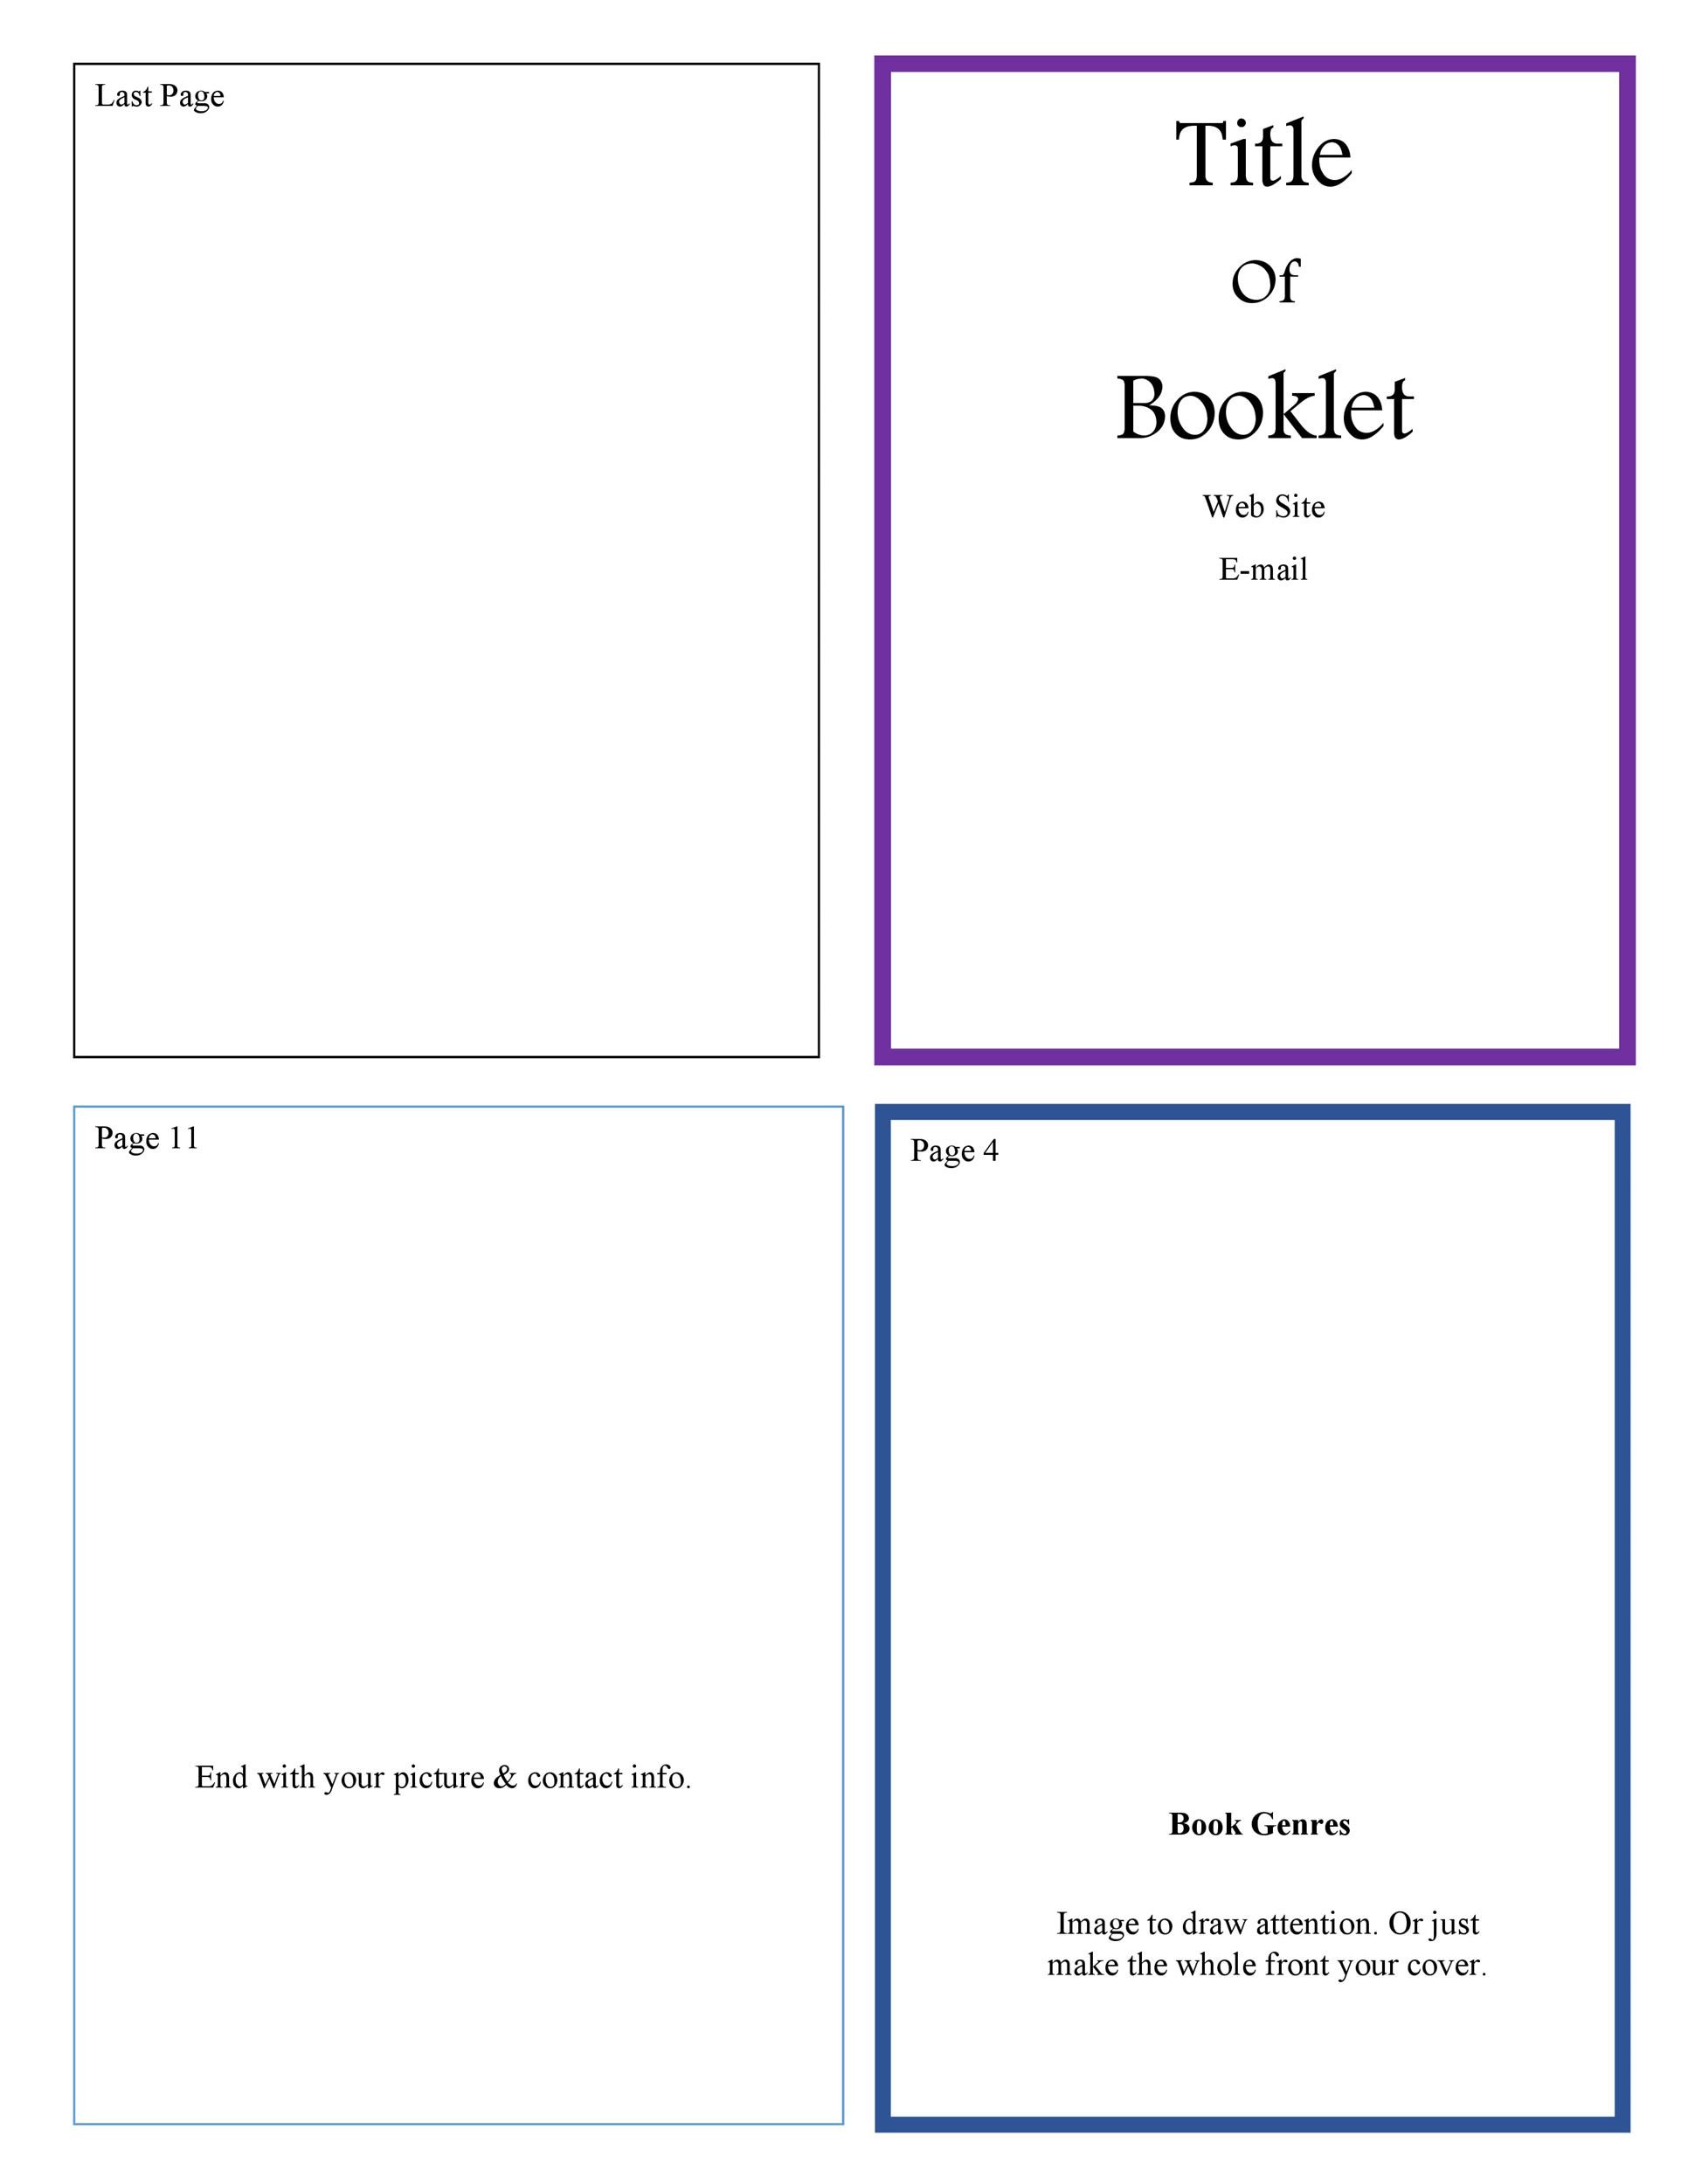 49 Free Booklet Templates amp Designs MS Word TemplateLab